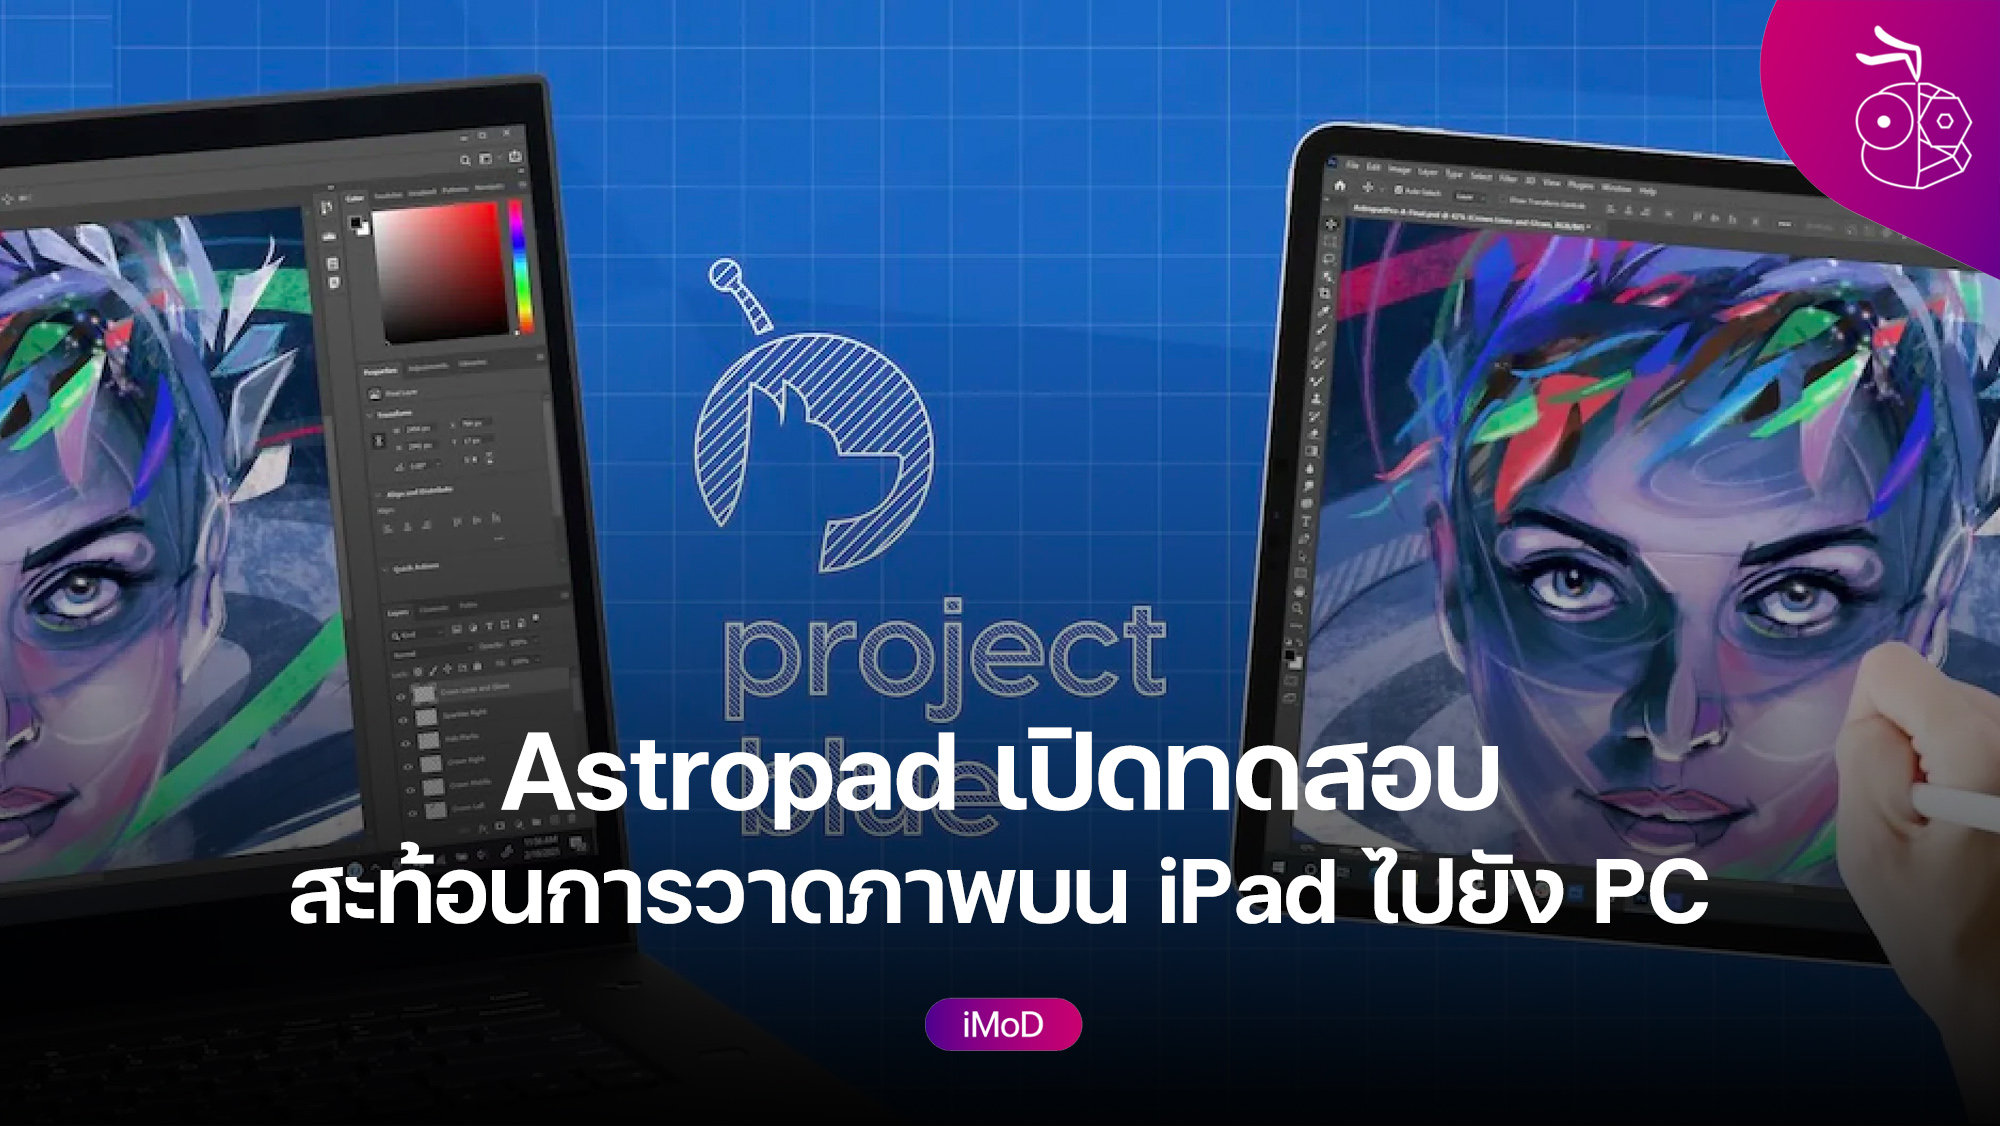 project blue astropad